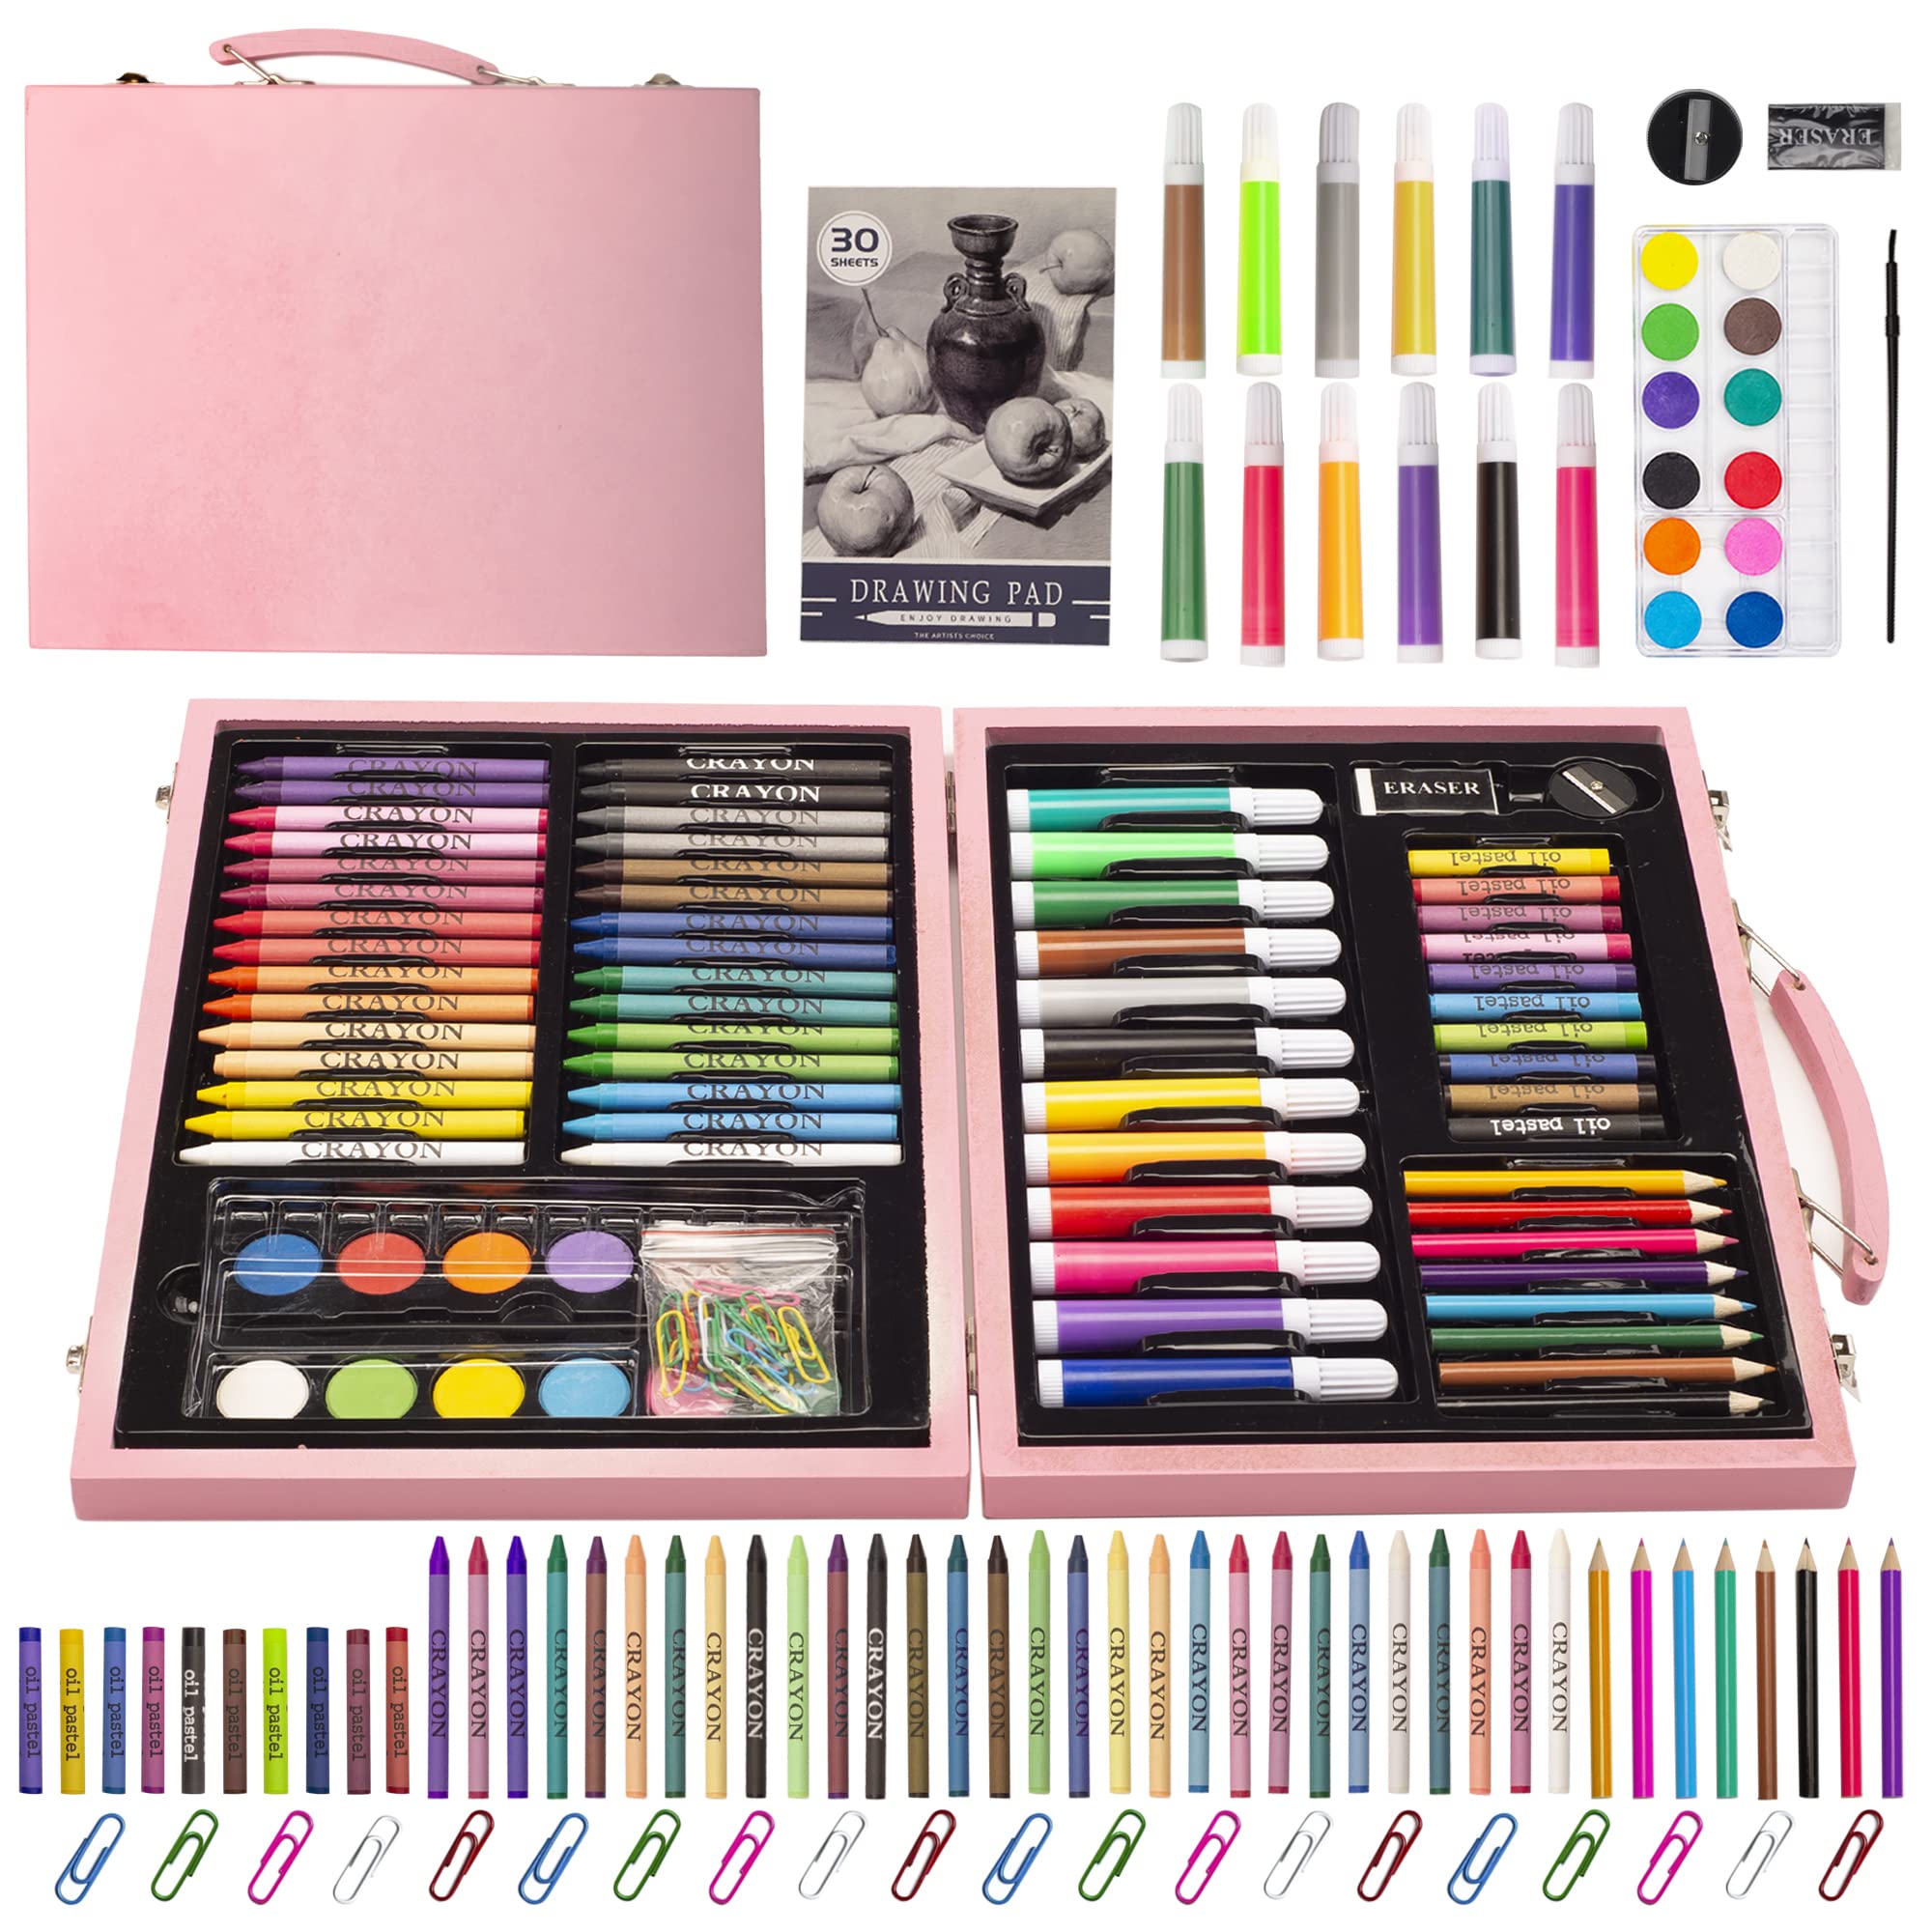 Amazon.com: KIDDYCOLOR 150 Pieces Wooden Kids Art Kit, Deluxe Artist Drawing  & Painting Set, Portable Case with Oil Pastels, Crayons, Colored Pencils,  Markers, Christmas New Year Gift for Kids Teens : Toys